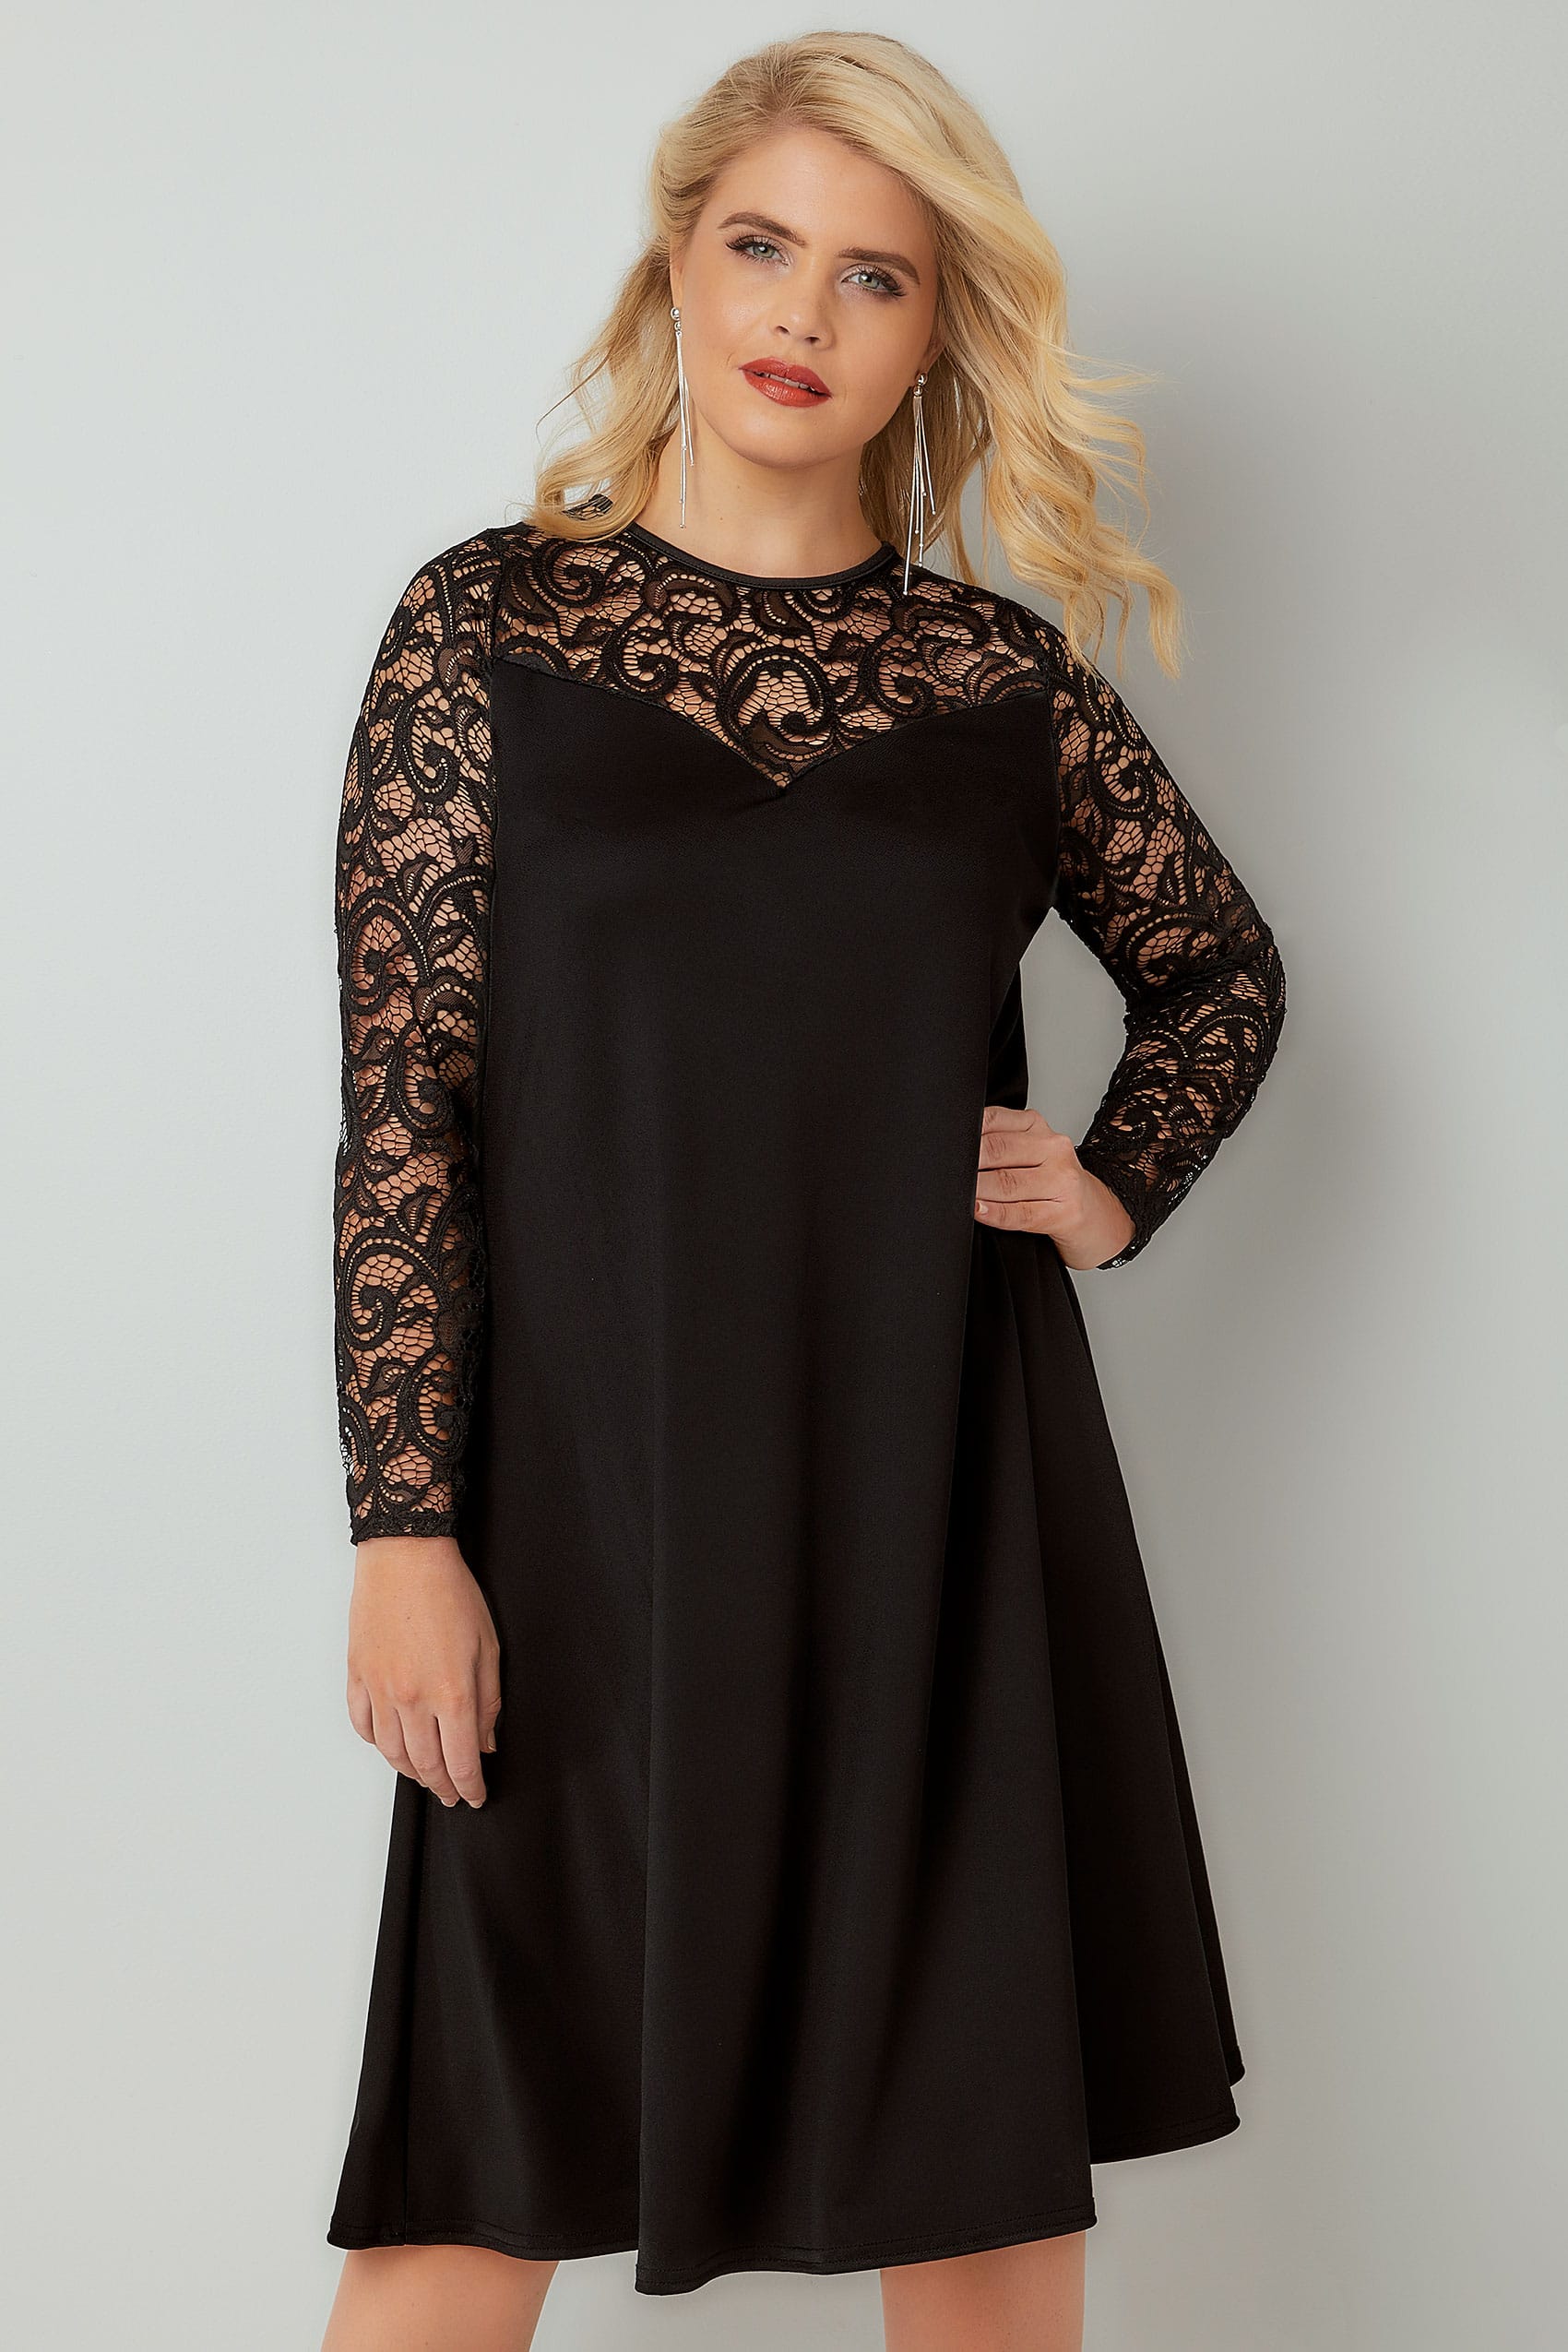 Black Swing Dress With Lace Yoke & Sleeves, Plus size 16 to 36